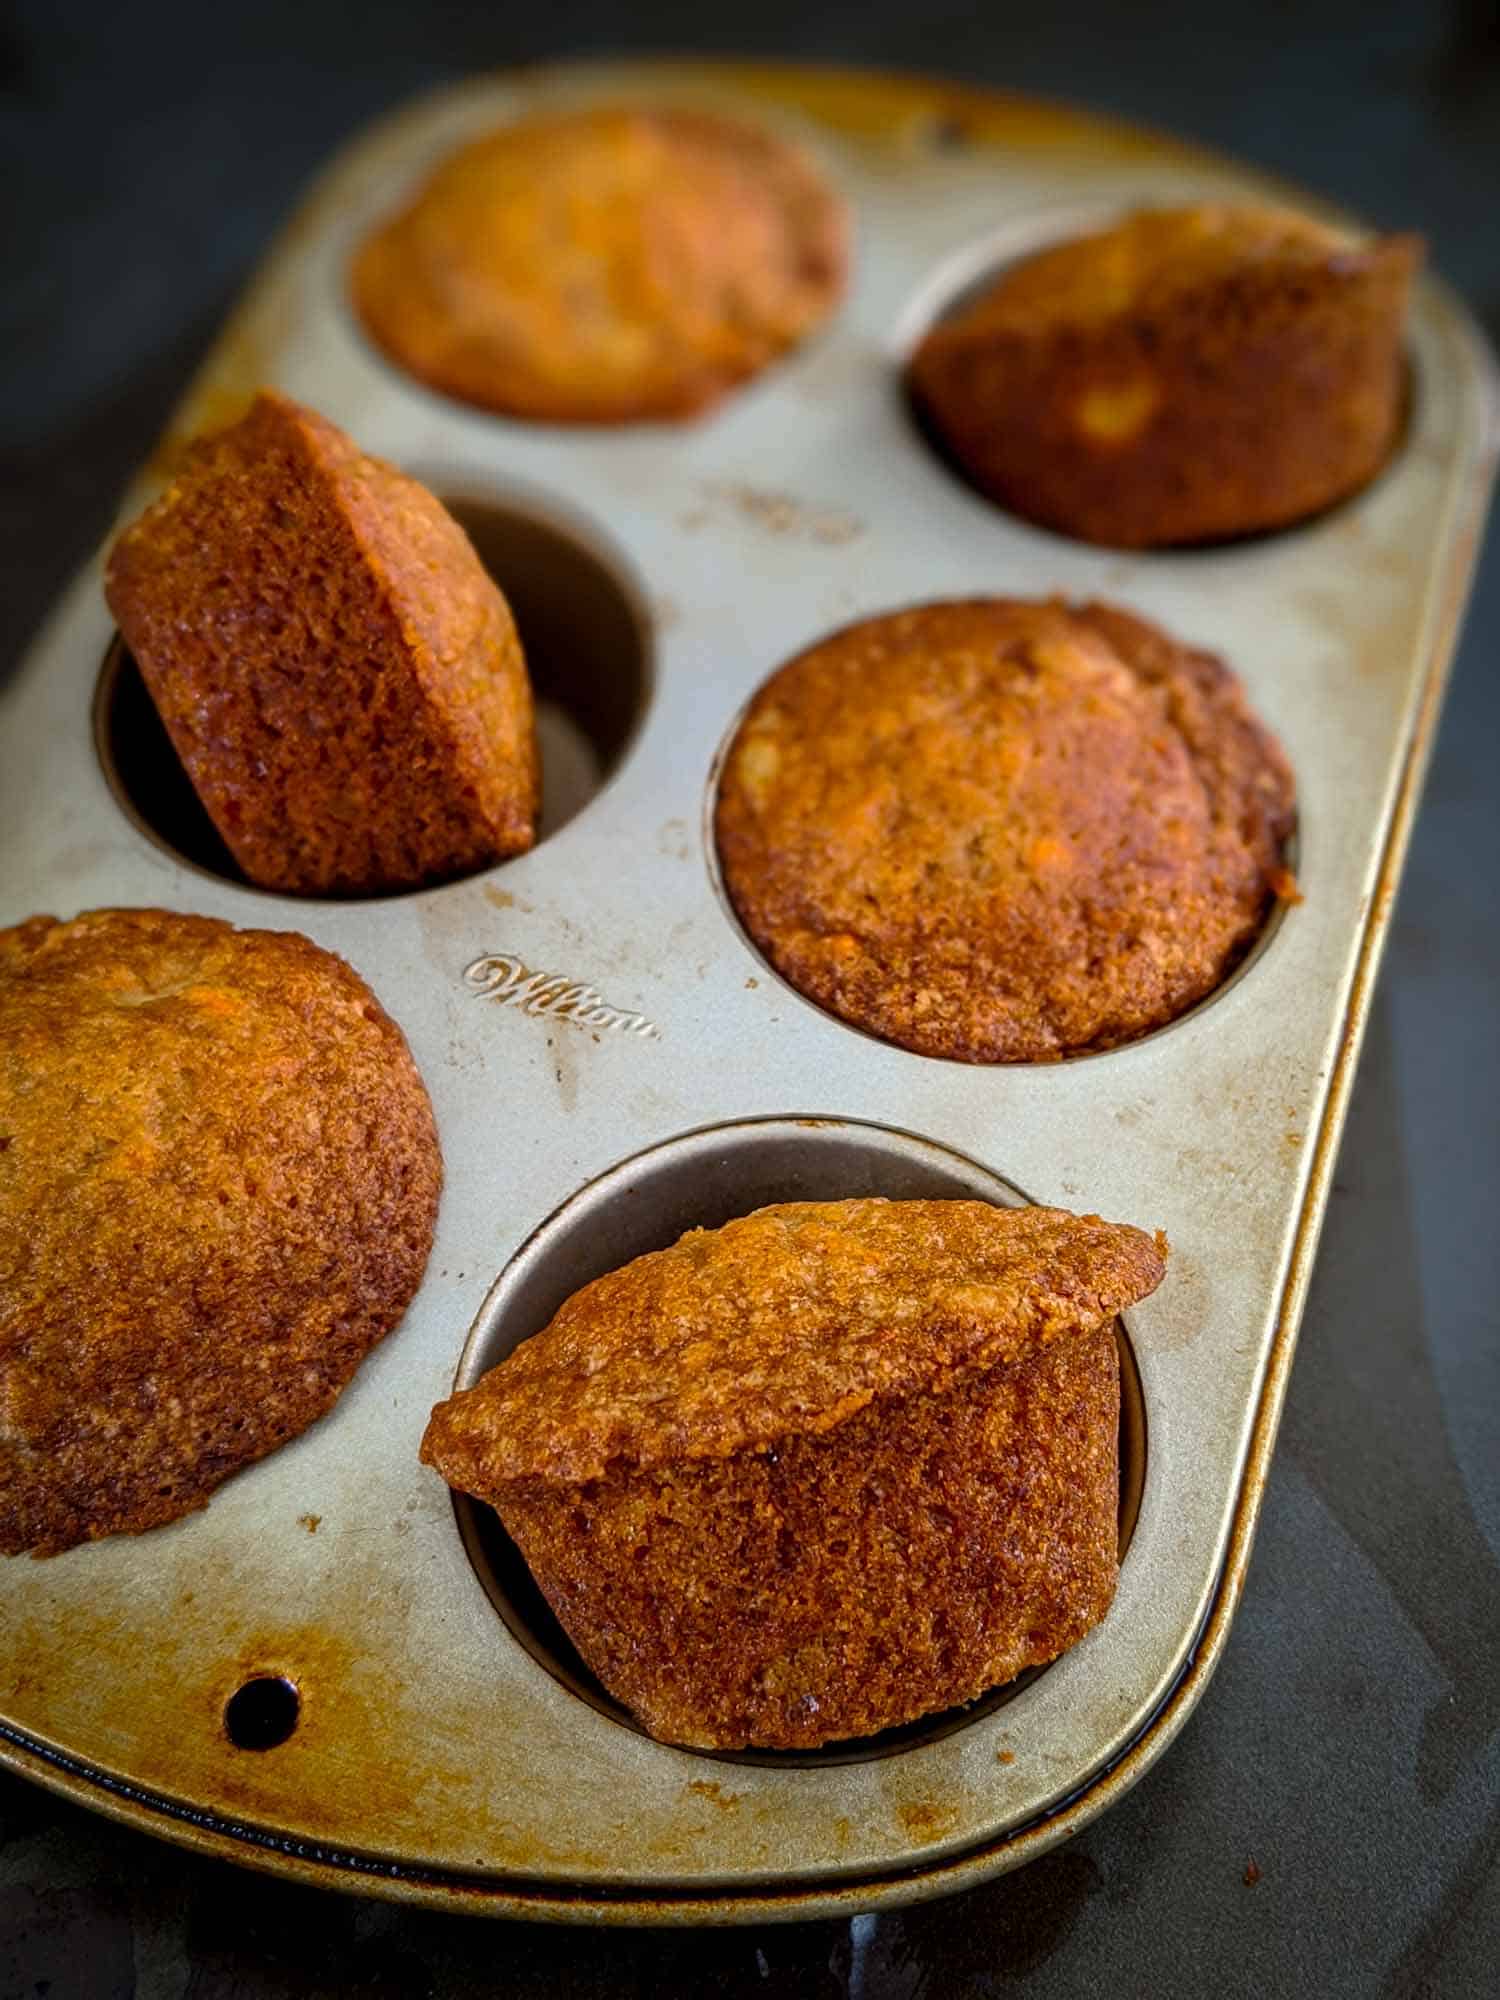 Pineapple carrot muffins in a muffin tin.